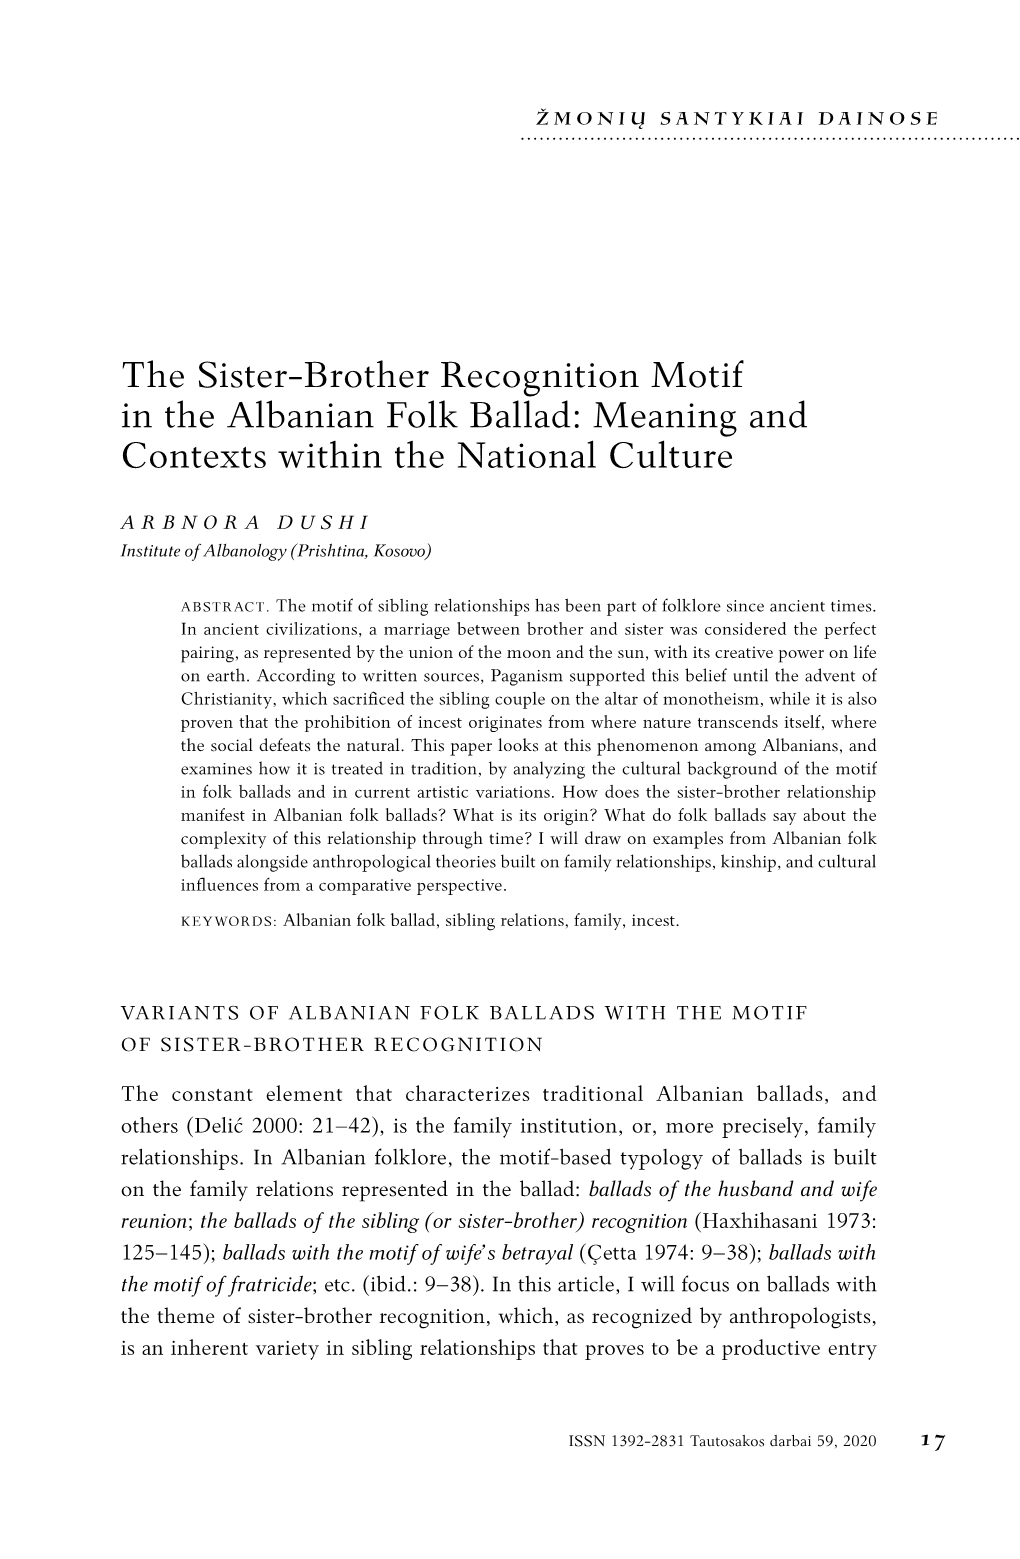 The Sister-Brother Recognition Motif in the Albanian Folk Ballad: Meaning and Contexts Within the National Culture